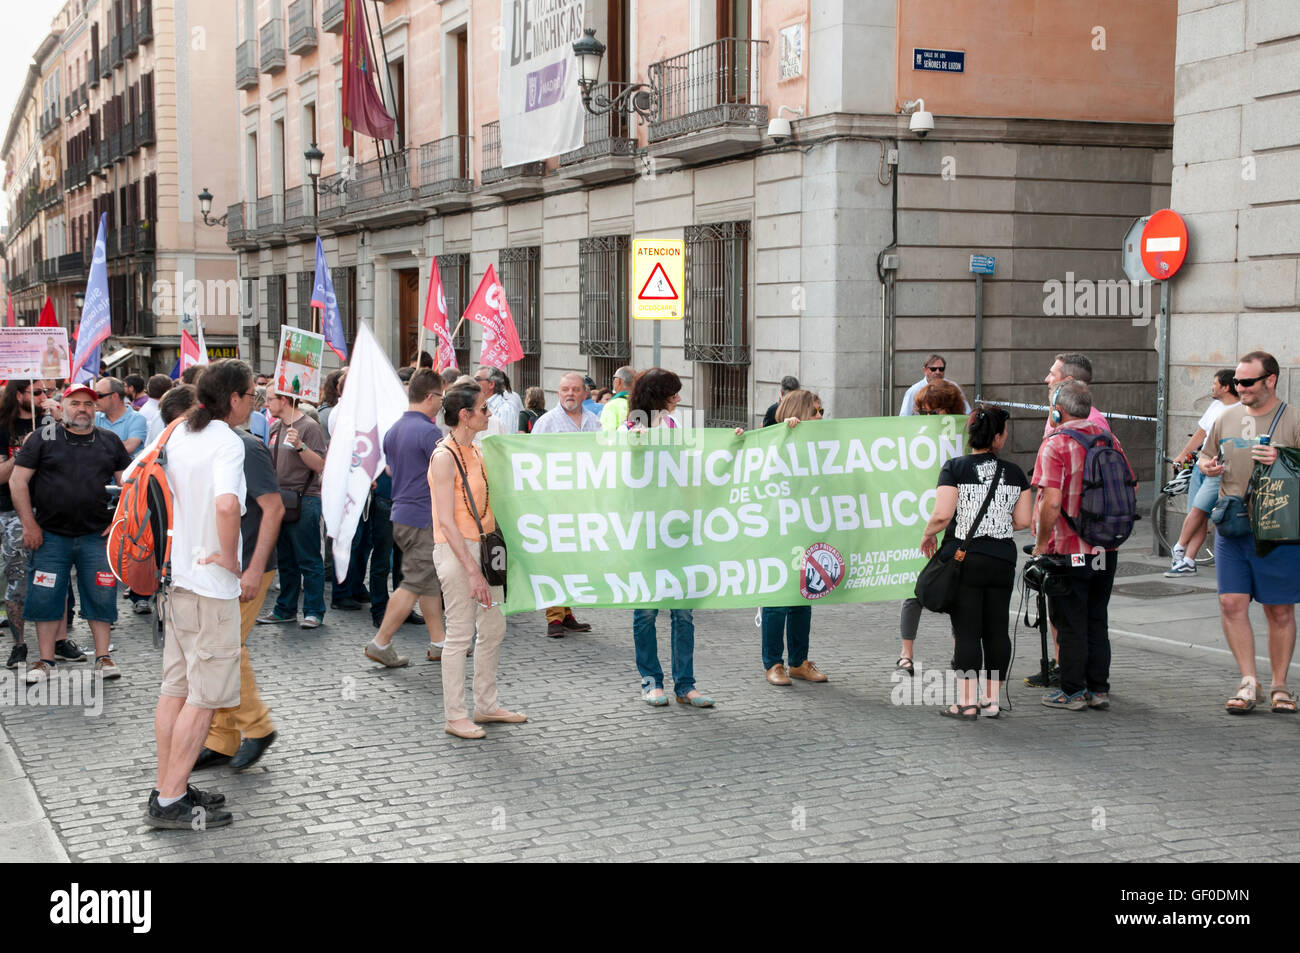 Protest on public services - Madrid - Spain Stock Photo